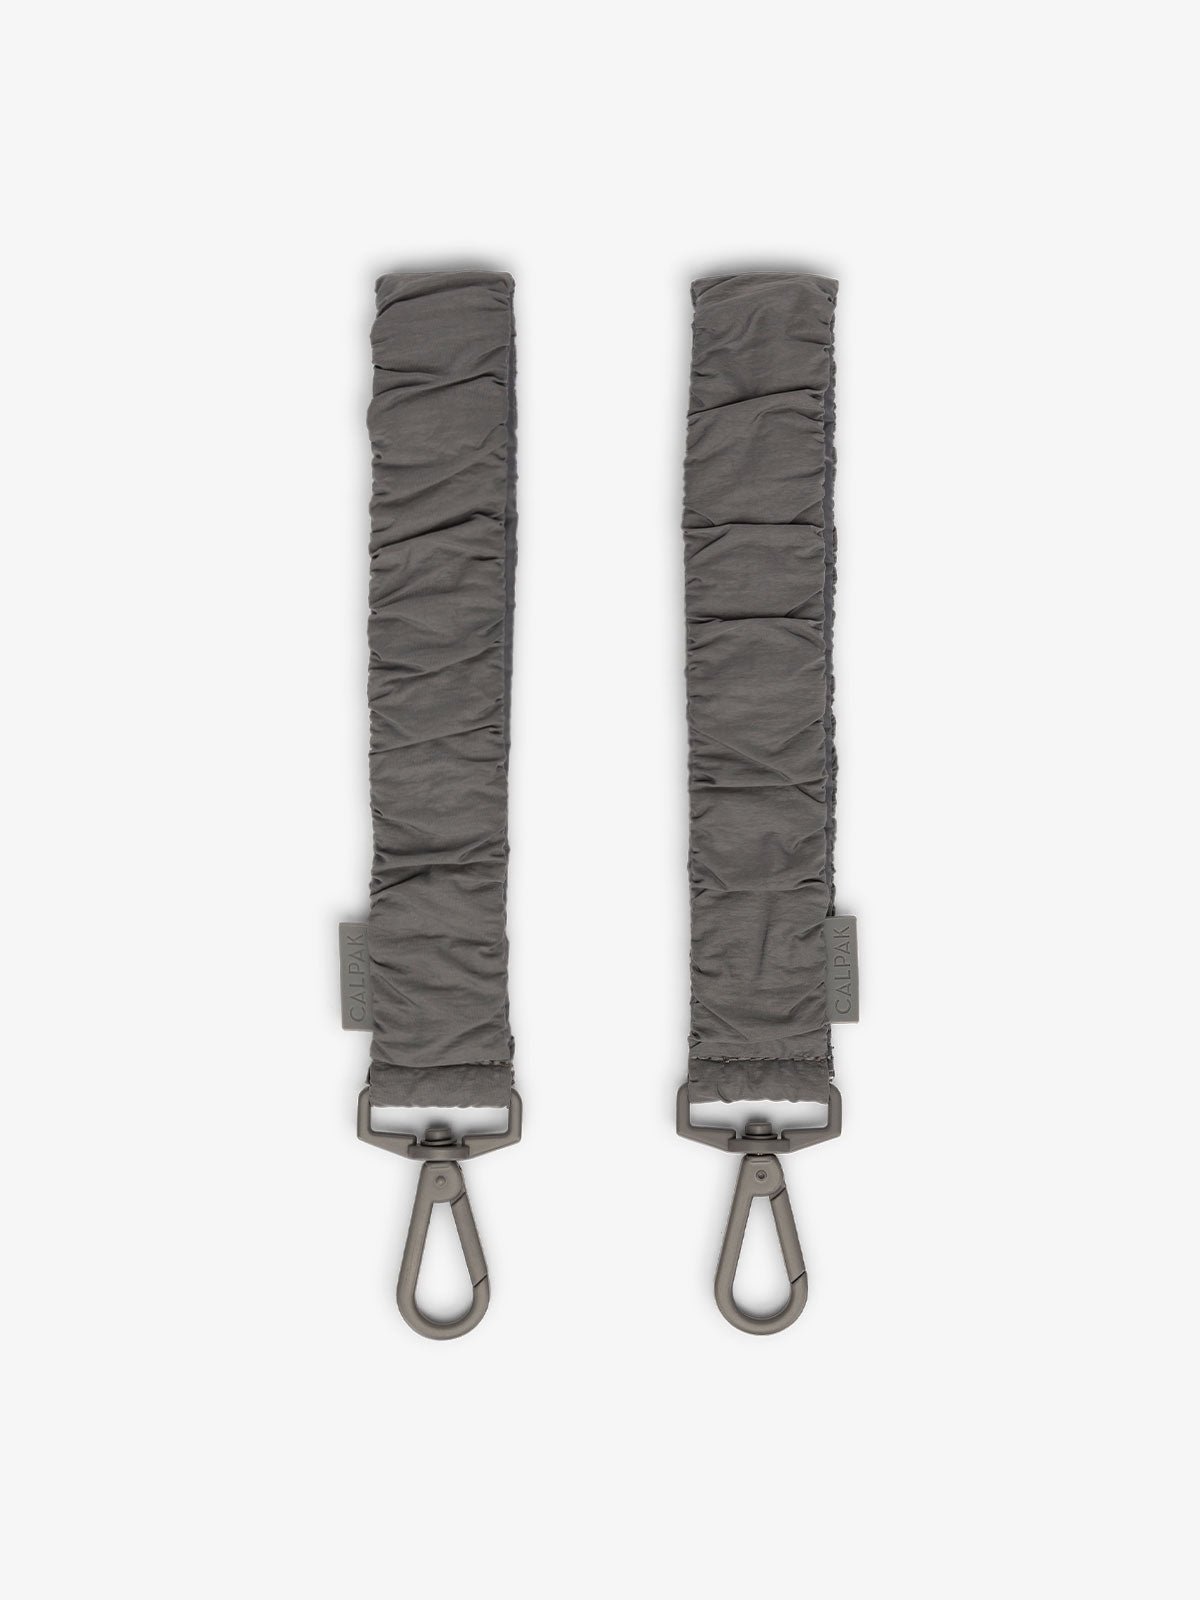 CALPAK Stroller Straps for Diaper Bag made with Oeko-Tex certified, recycled, and water-resistant materials in slate